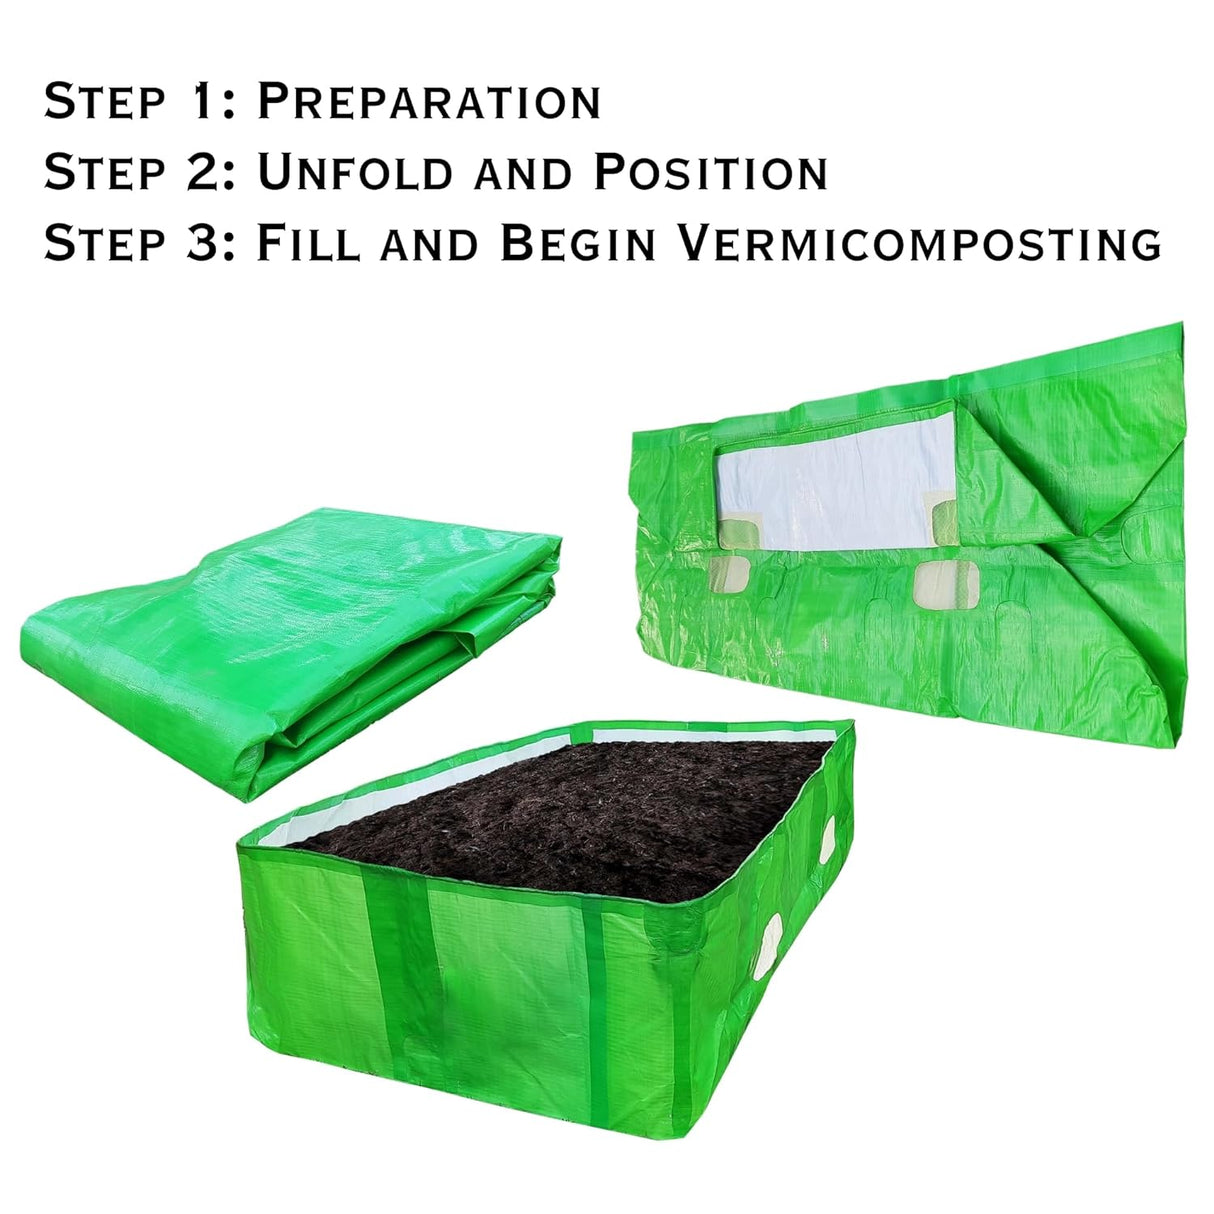 Singhal HDPE UV Stabilized Vermi Compost Bed 480 GSM, 8x4x2 Ft, 100% Virgin Quality Material, Green and White, Vermibed Agro Vermicompost Bed (Vermi Bed), Agro Vermi Compost Making Bed